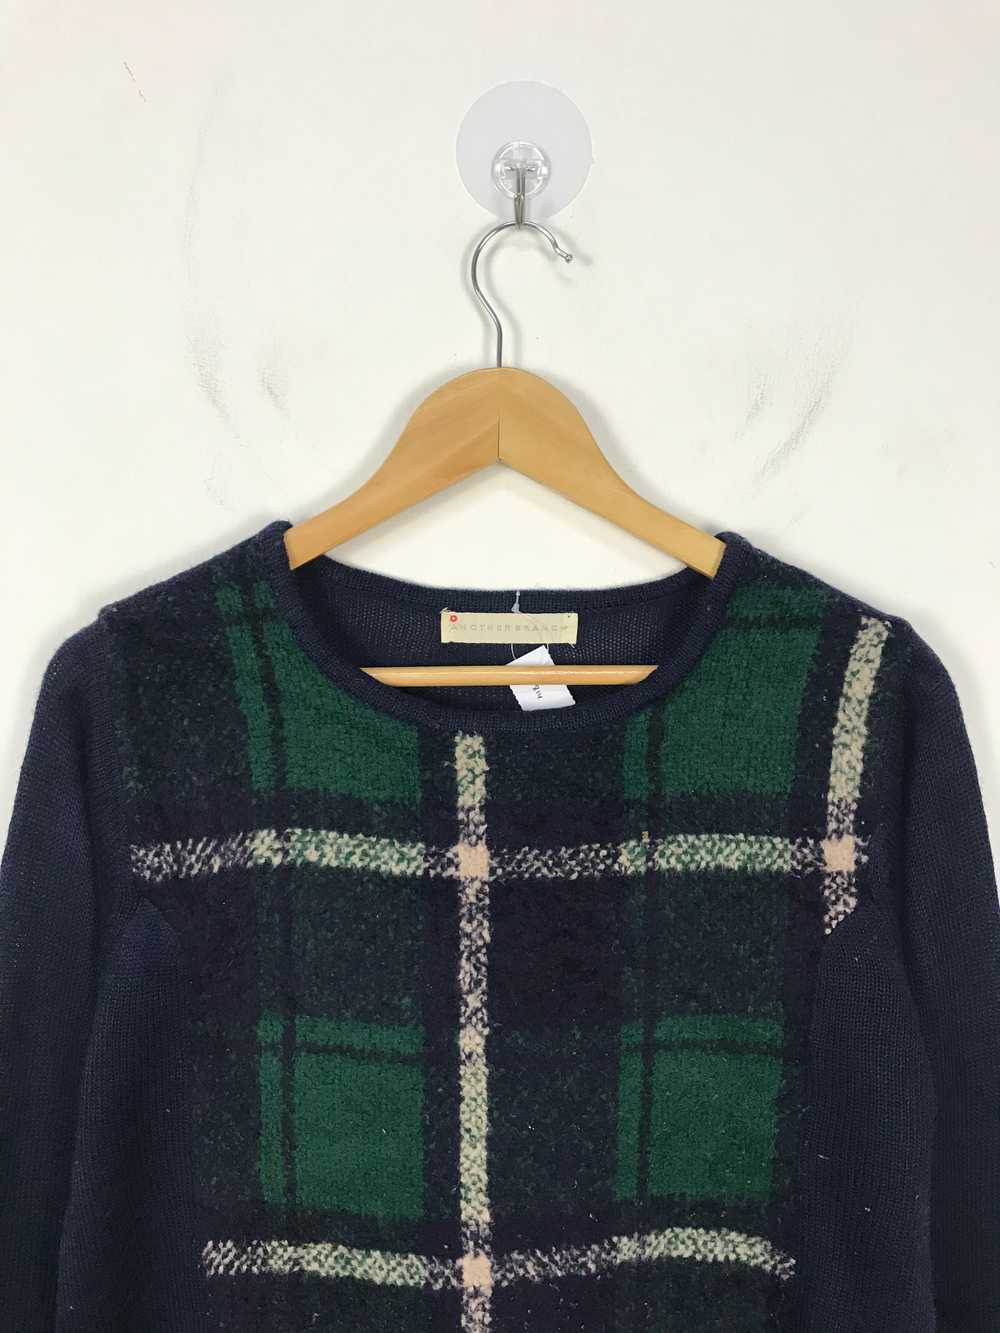 Japanese Brand - Another Brand Burberry Checkered… - image 2